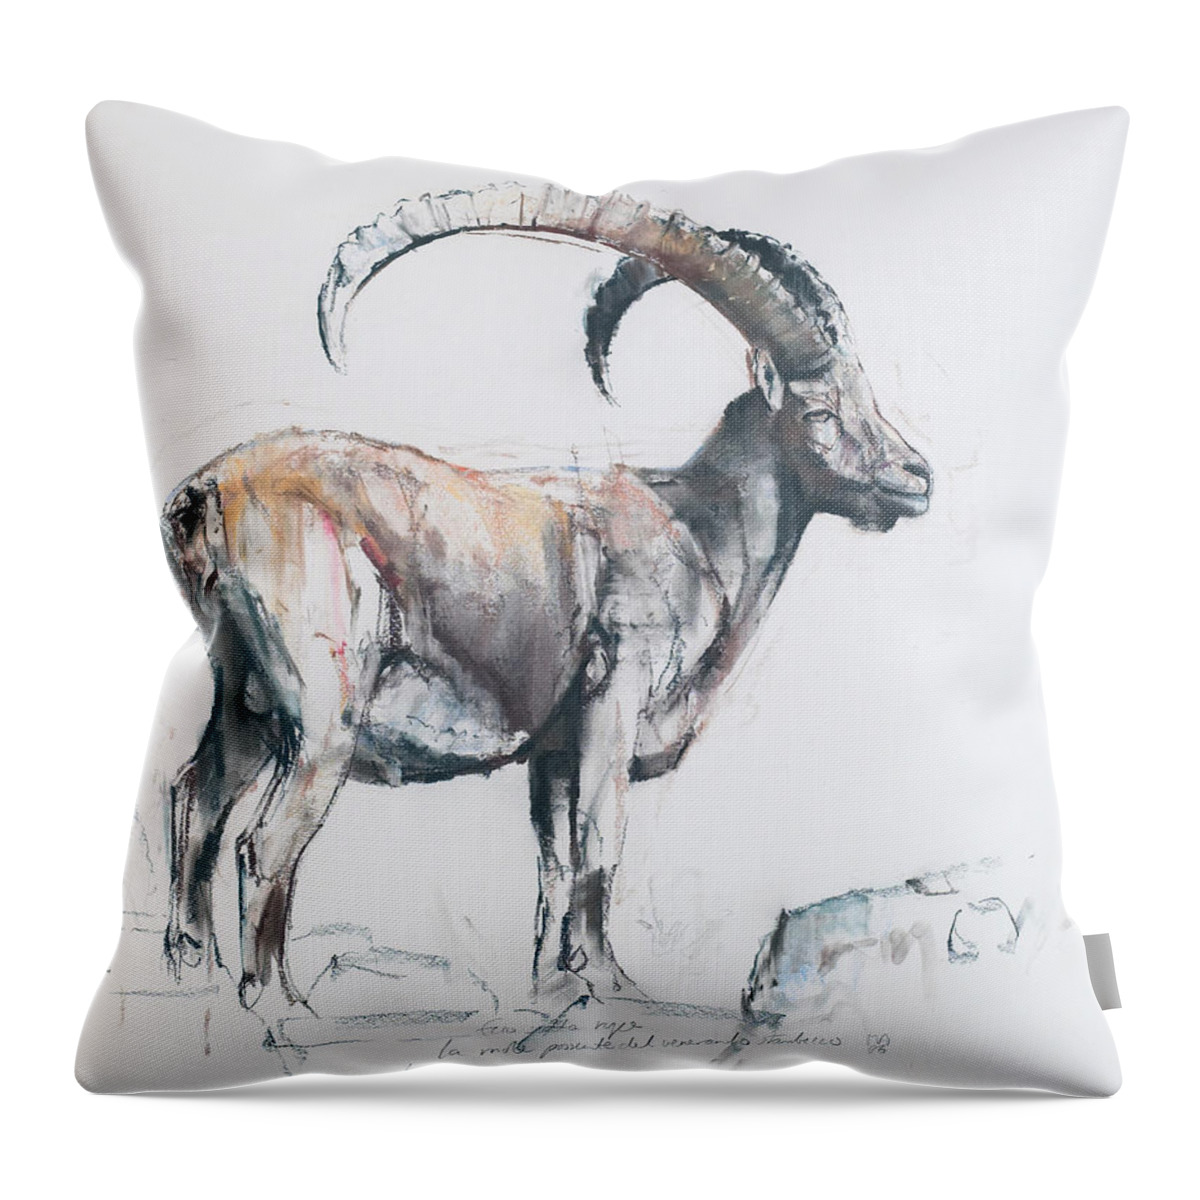 Male Throw Pillow featuring the painting Venerando Stambecco by Mark Adlington